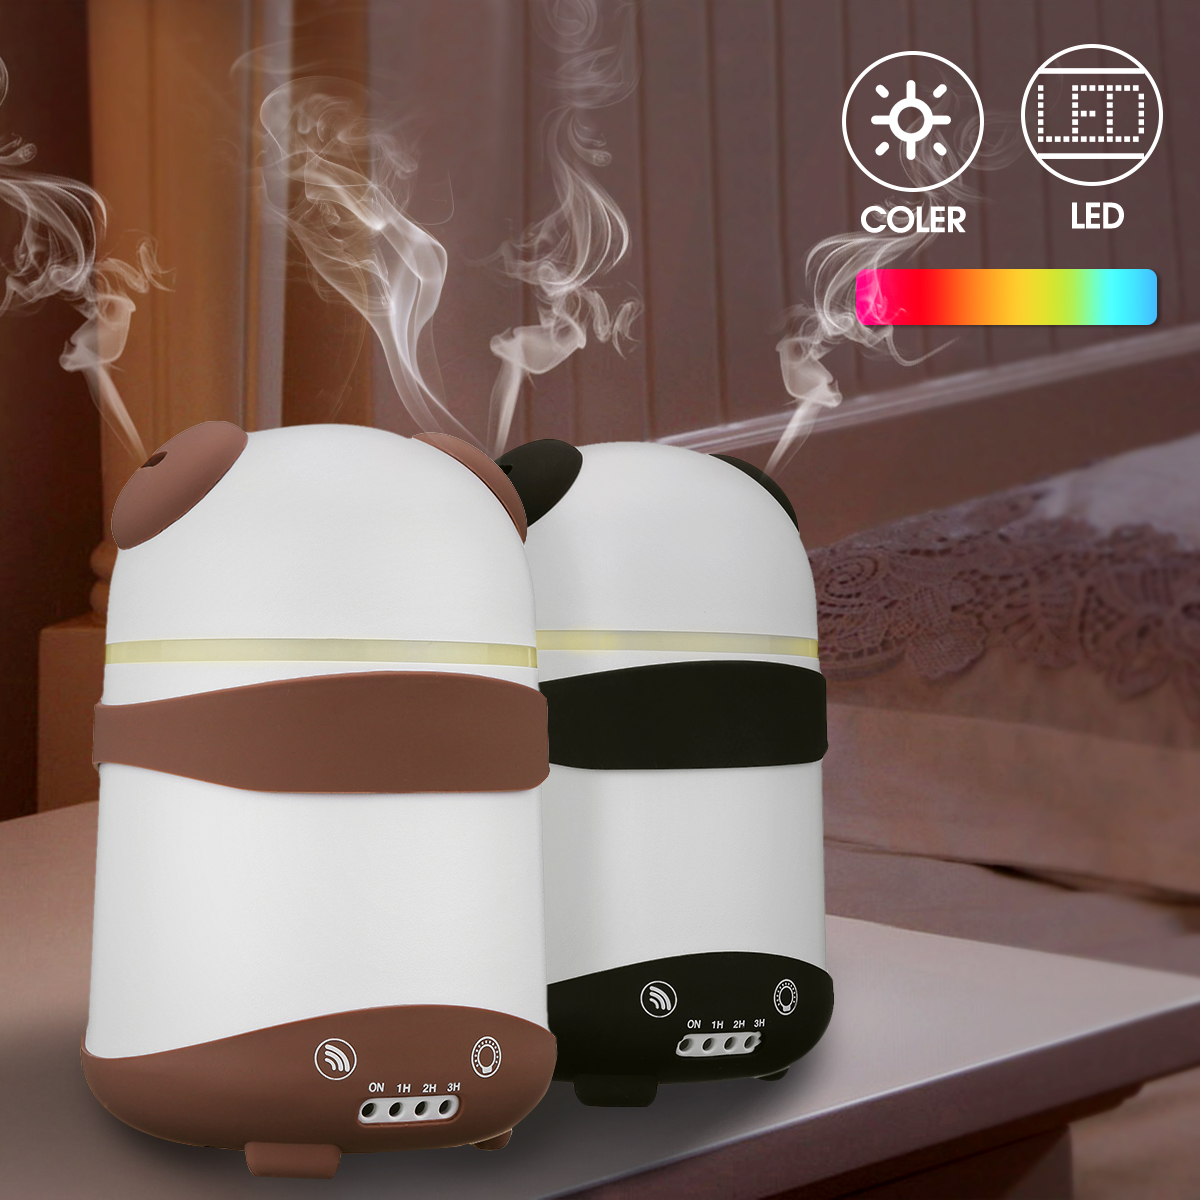 Dual Humidifier Air Oil Diffuser Aroma Mist Maker LED Cartoon Panda Style For Home Office US Plug 46